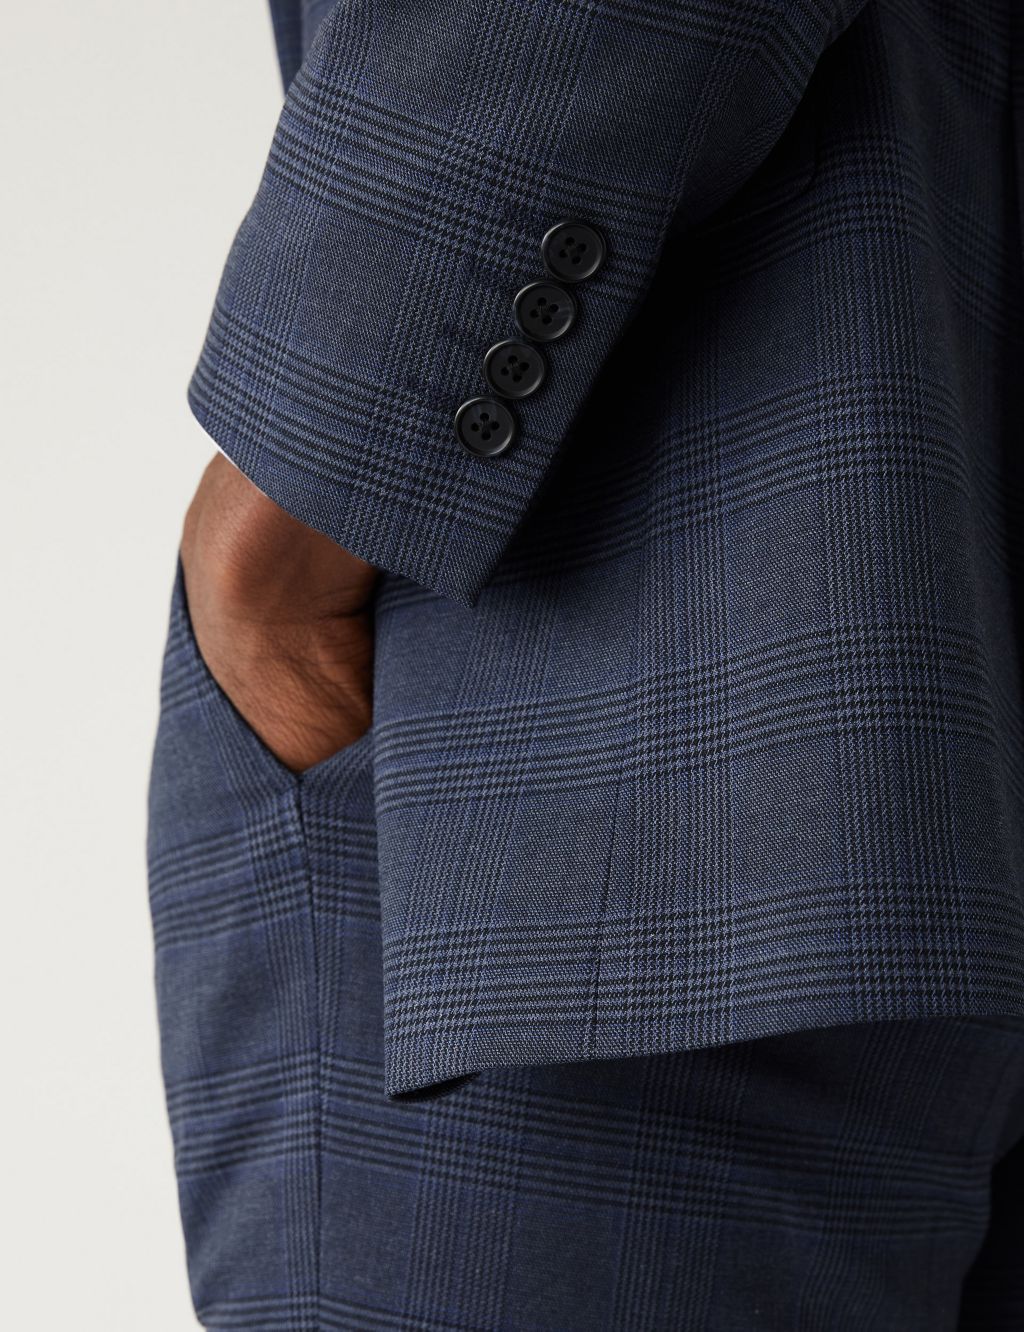 Regular Fit Prince of Wales Check Suit image 6